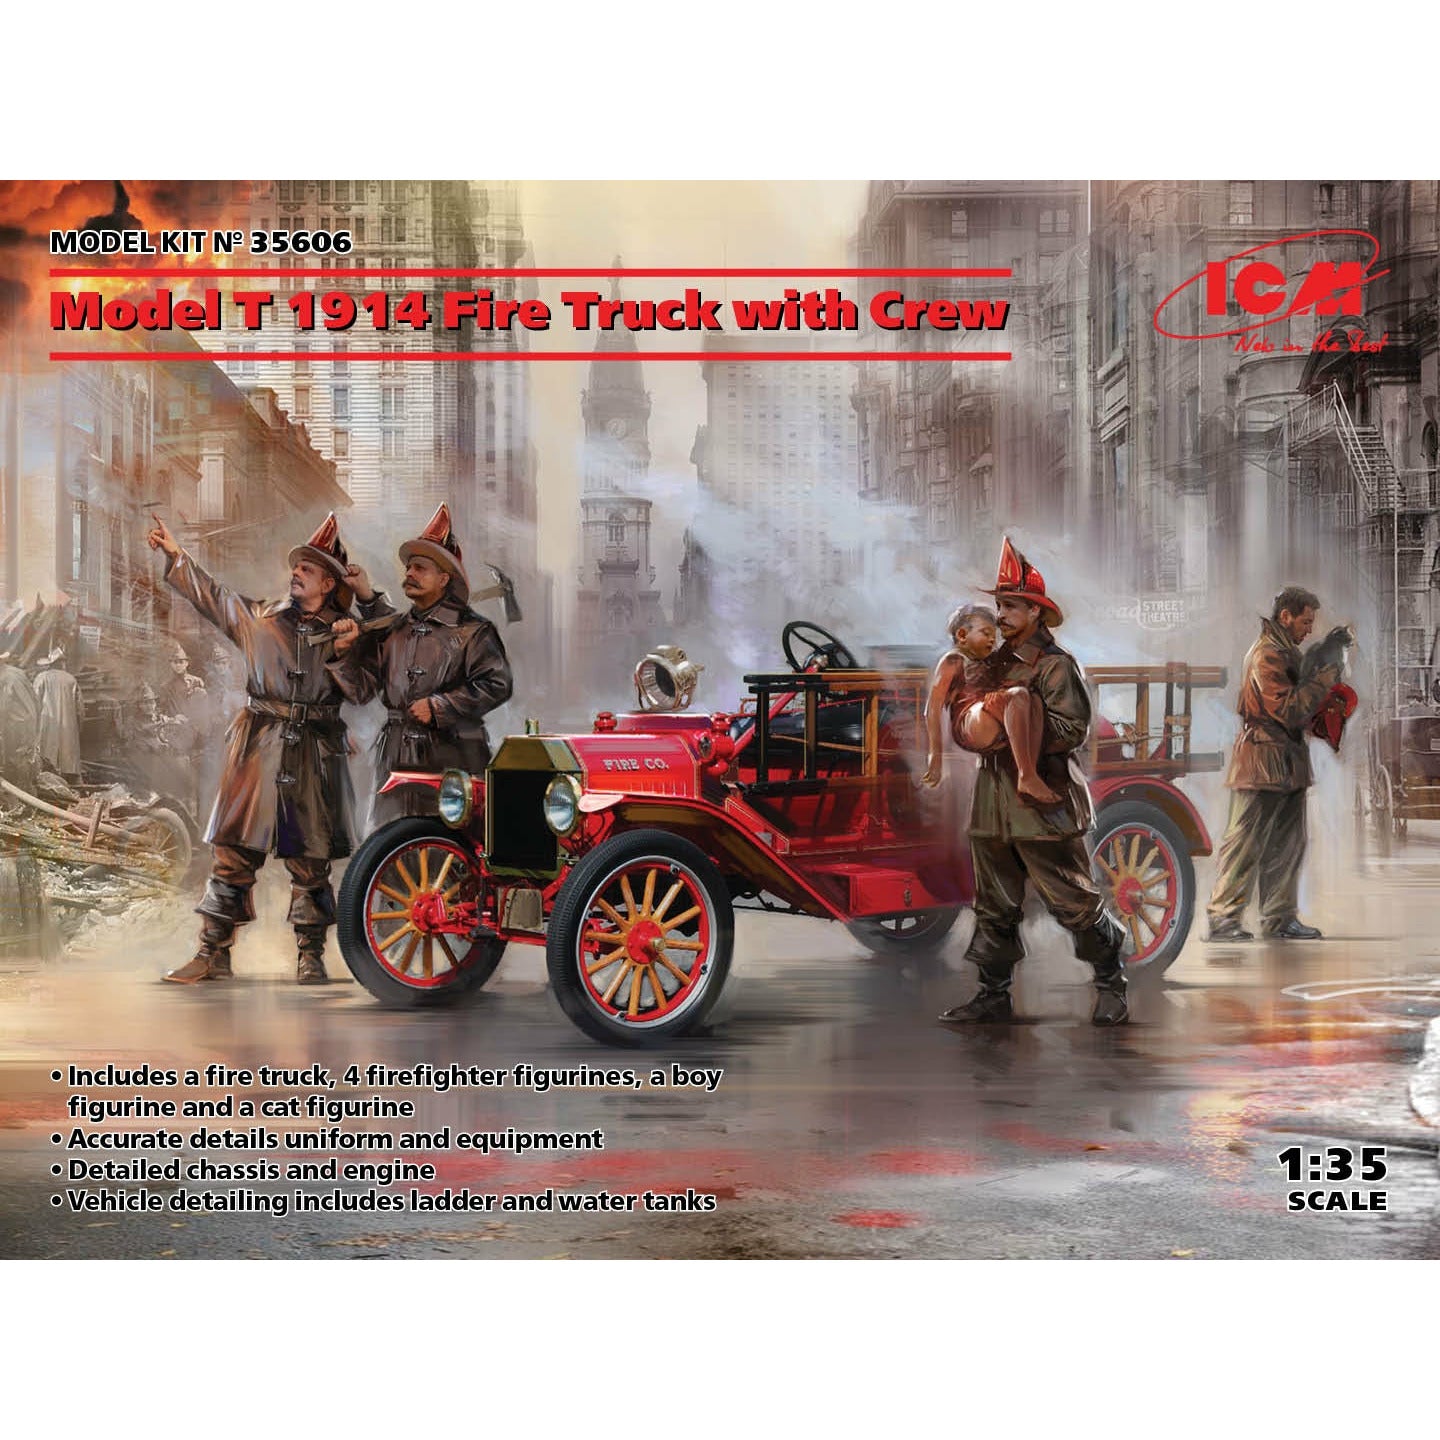 Model T 1914 Fire Truck with Crew 1/35 #35606 by ICM